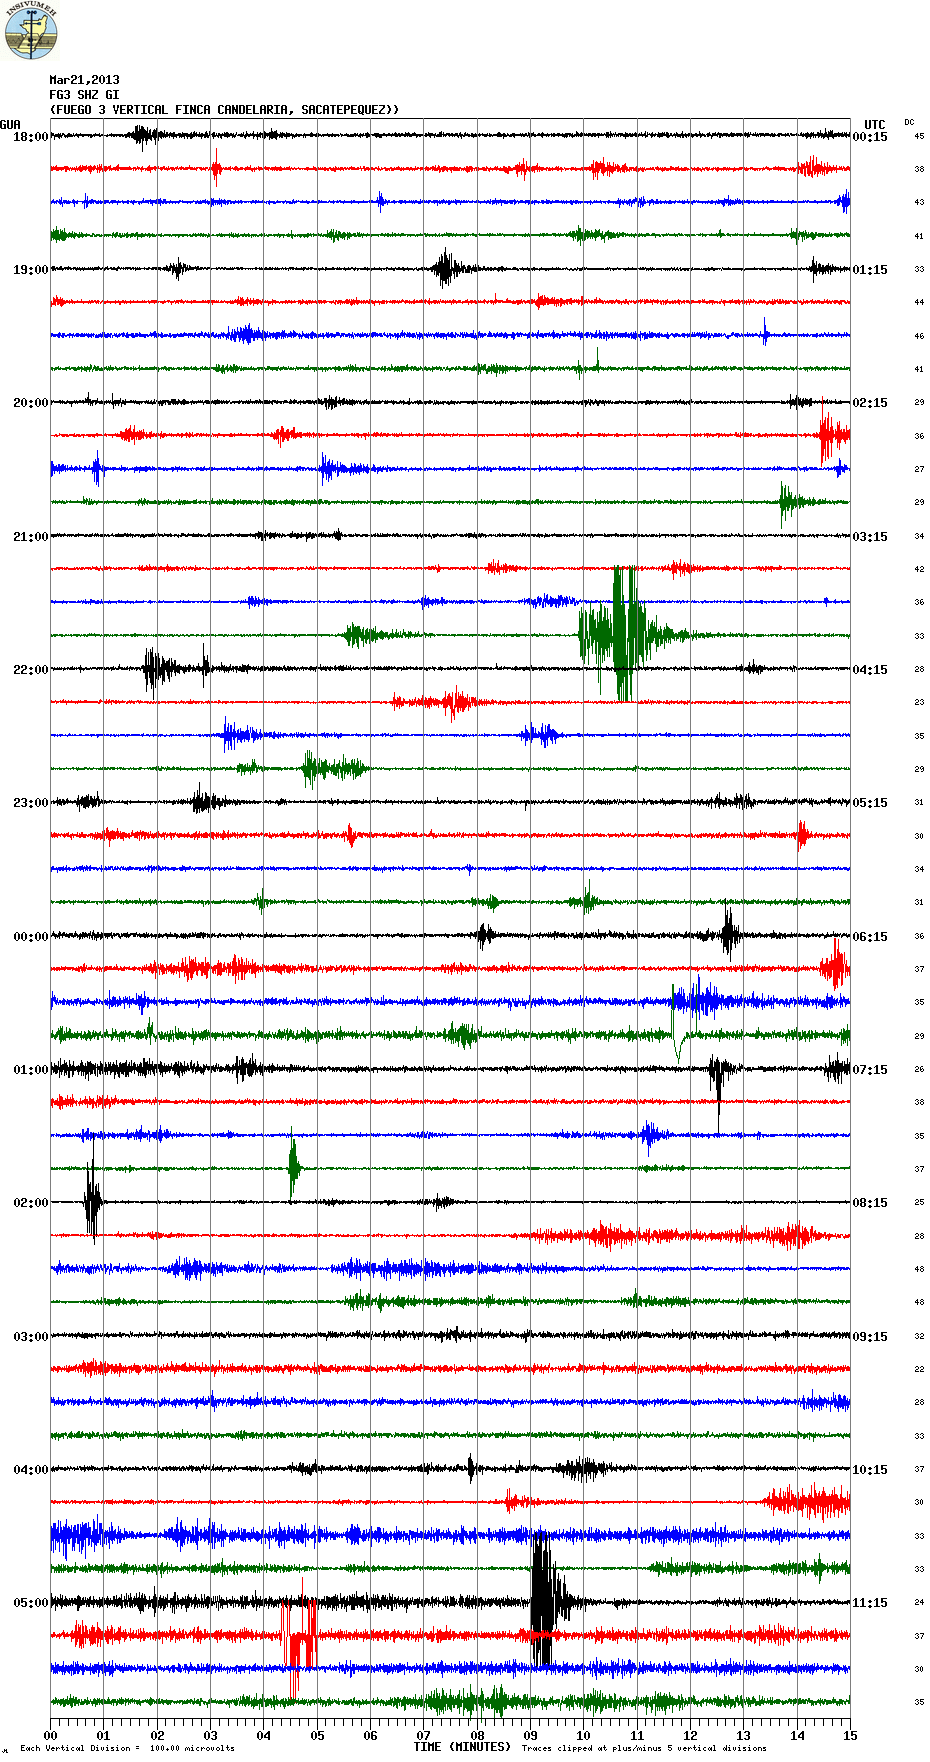 Today's seismic signal from Fuego (FG3 station, INSIVUMEH)